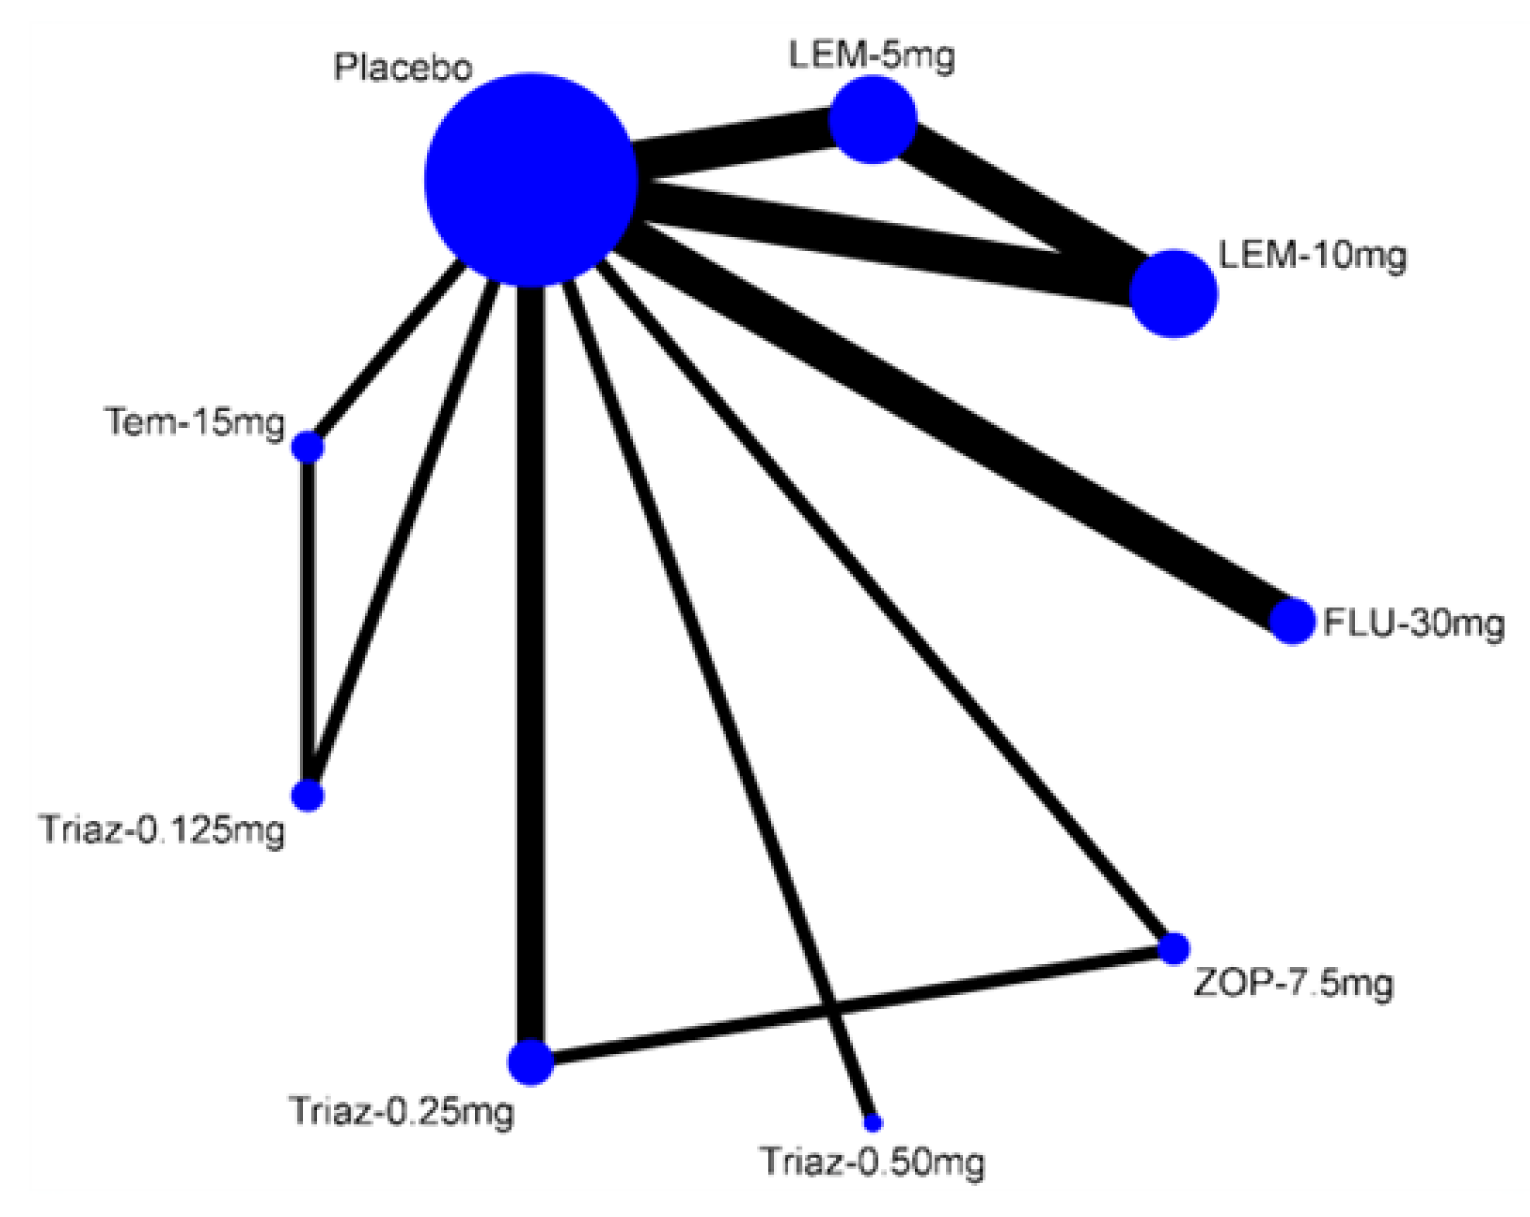 This is a network of the different comparisons for insomnia where bigger nodes imply more information (patients). Placebo is connected to flurazepam, lemborexant, temazepam, triazolam, and zopiclone.